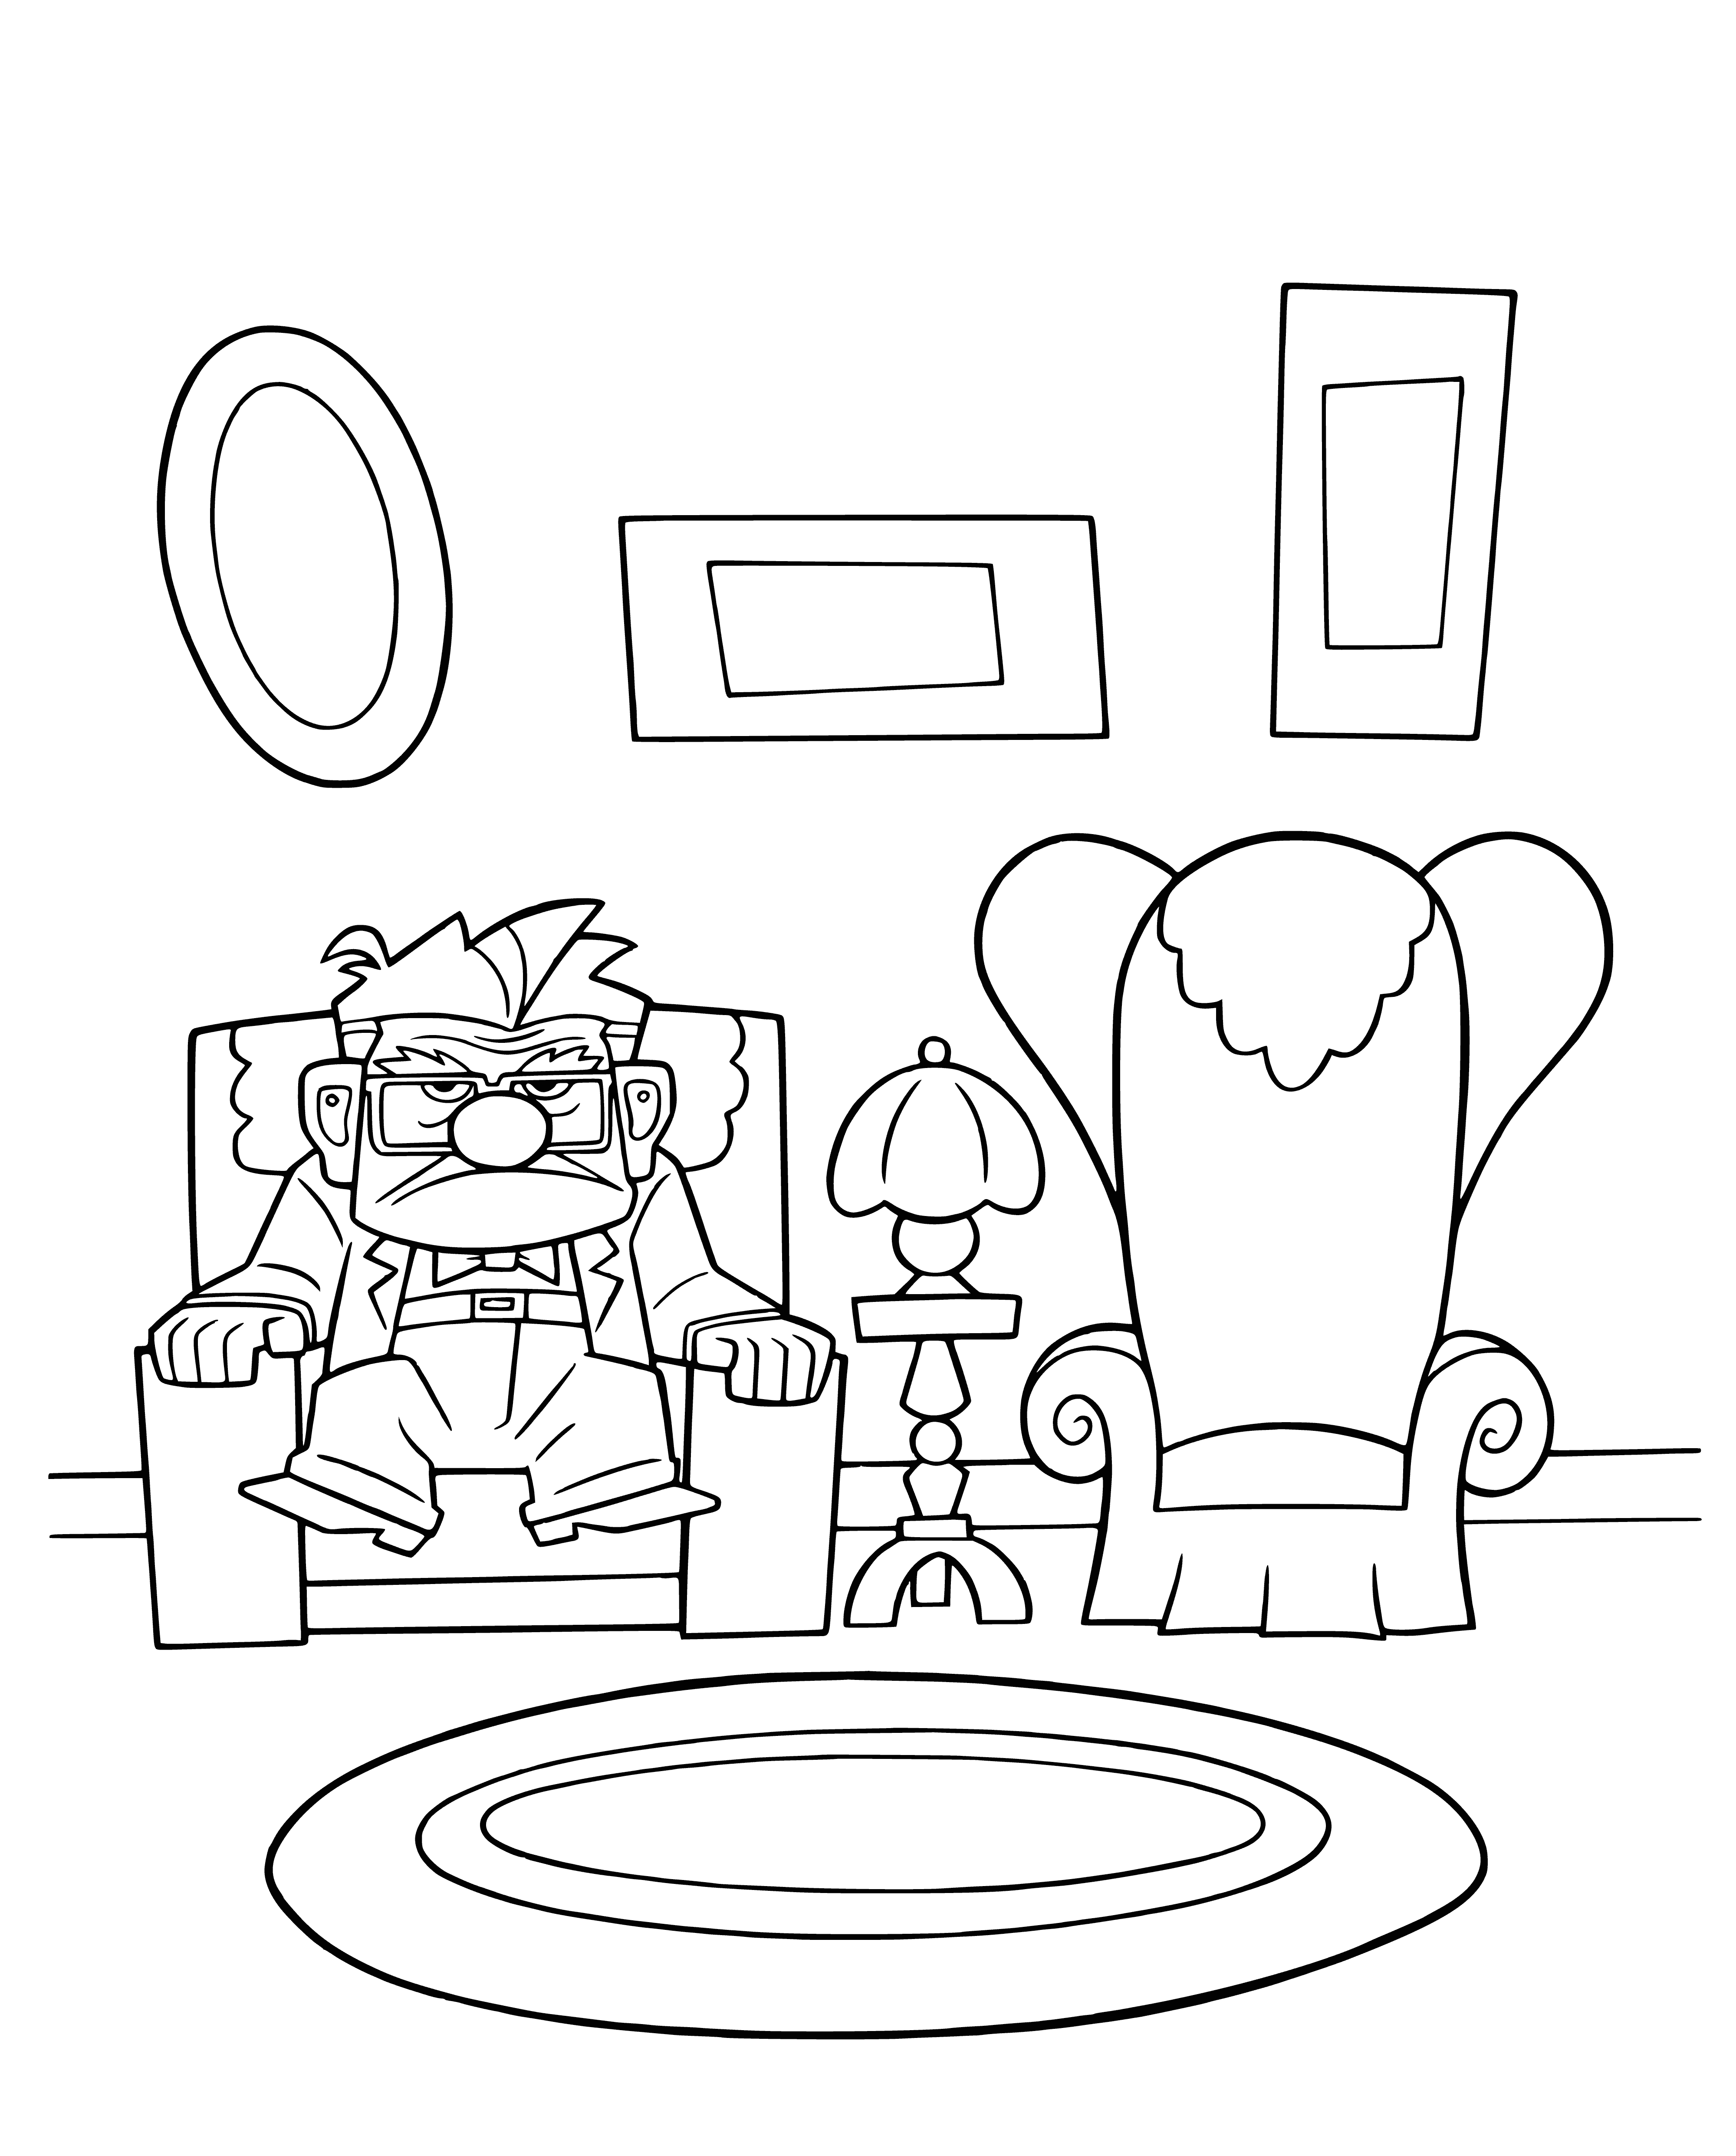 Karl alone coloring page